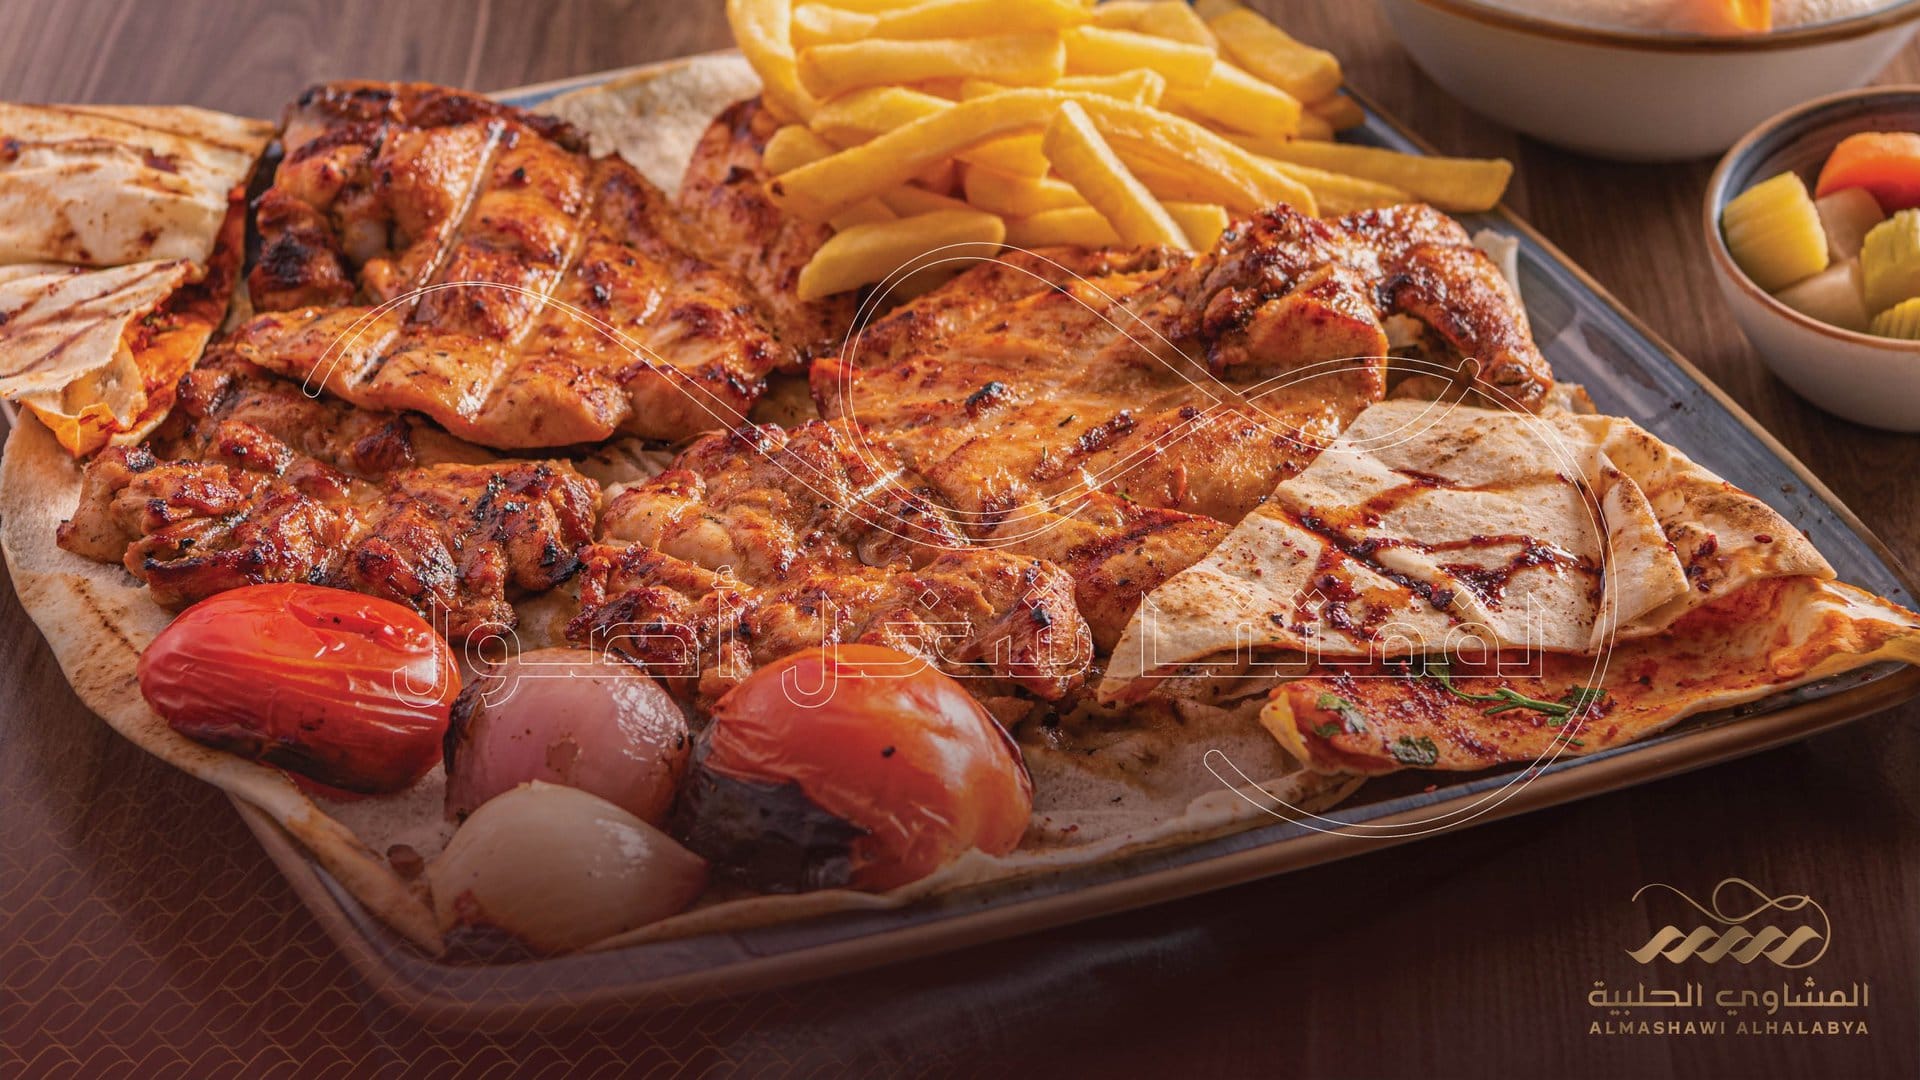 Get Ready for a Mouthwatering Experience: The Best Place to Enjoy Authentic BBQ in Dubai